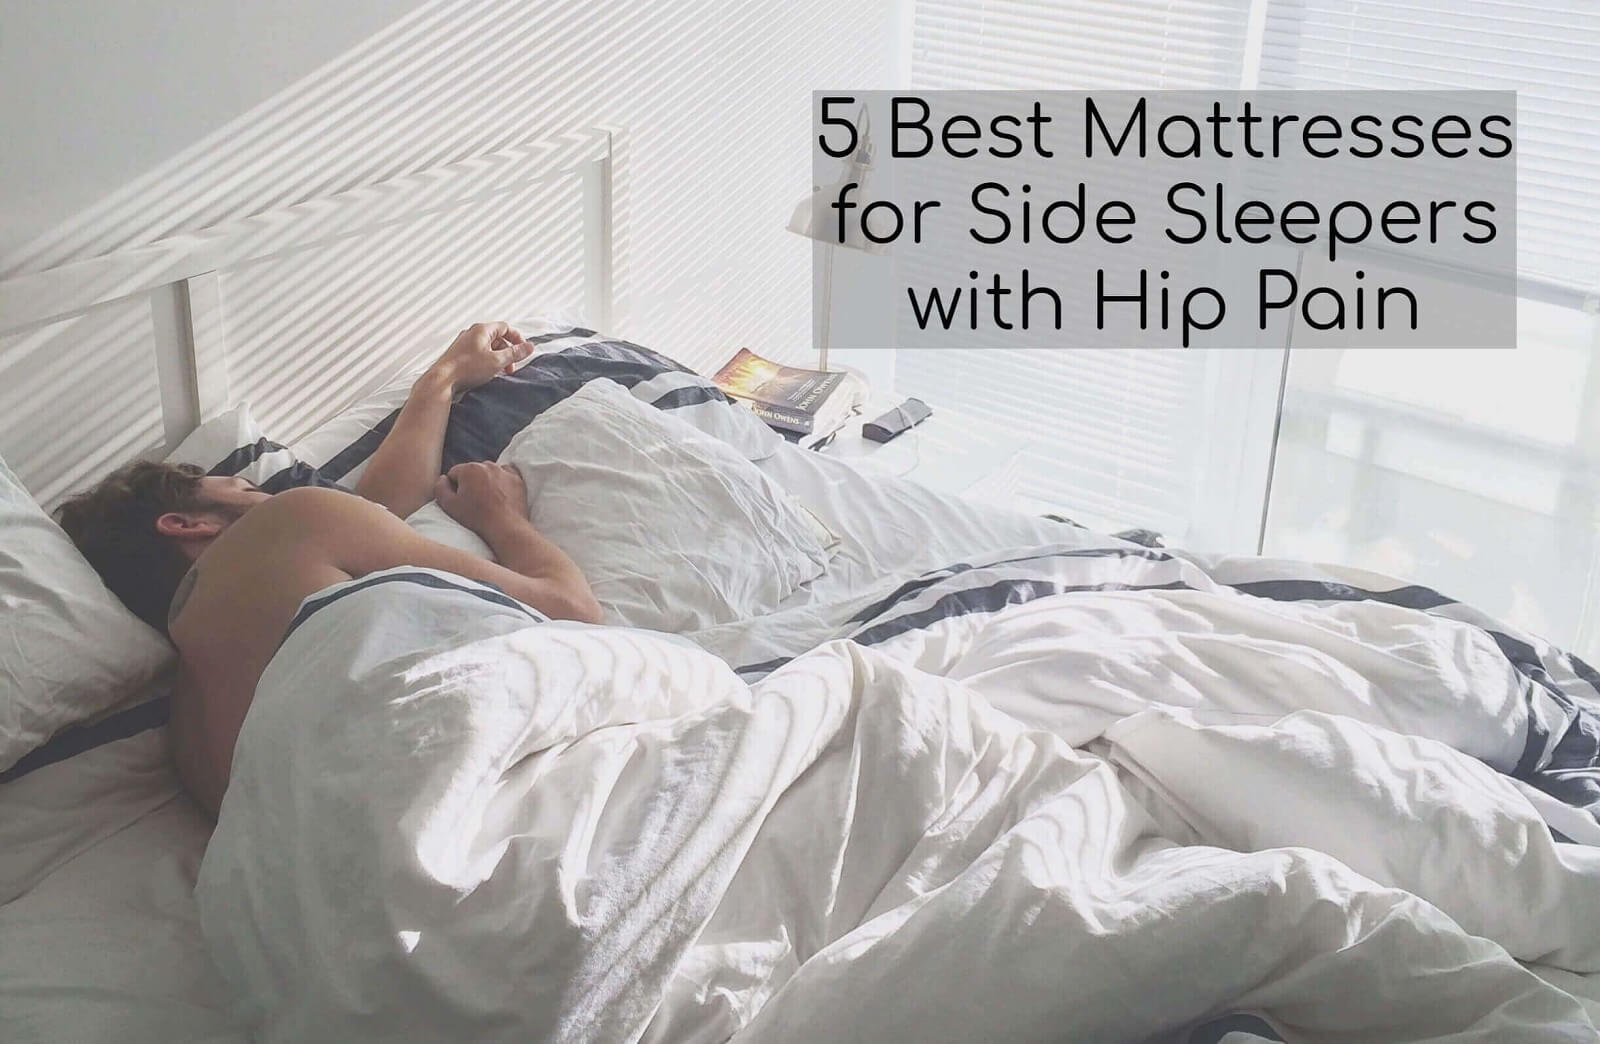 hip pain on bed firm or soft mattress